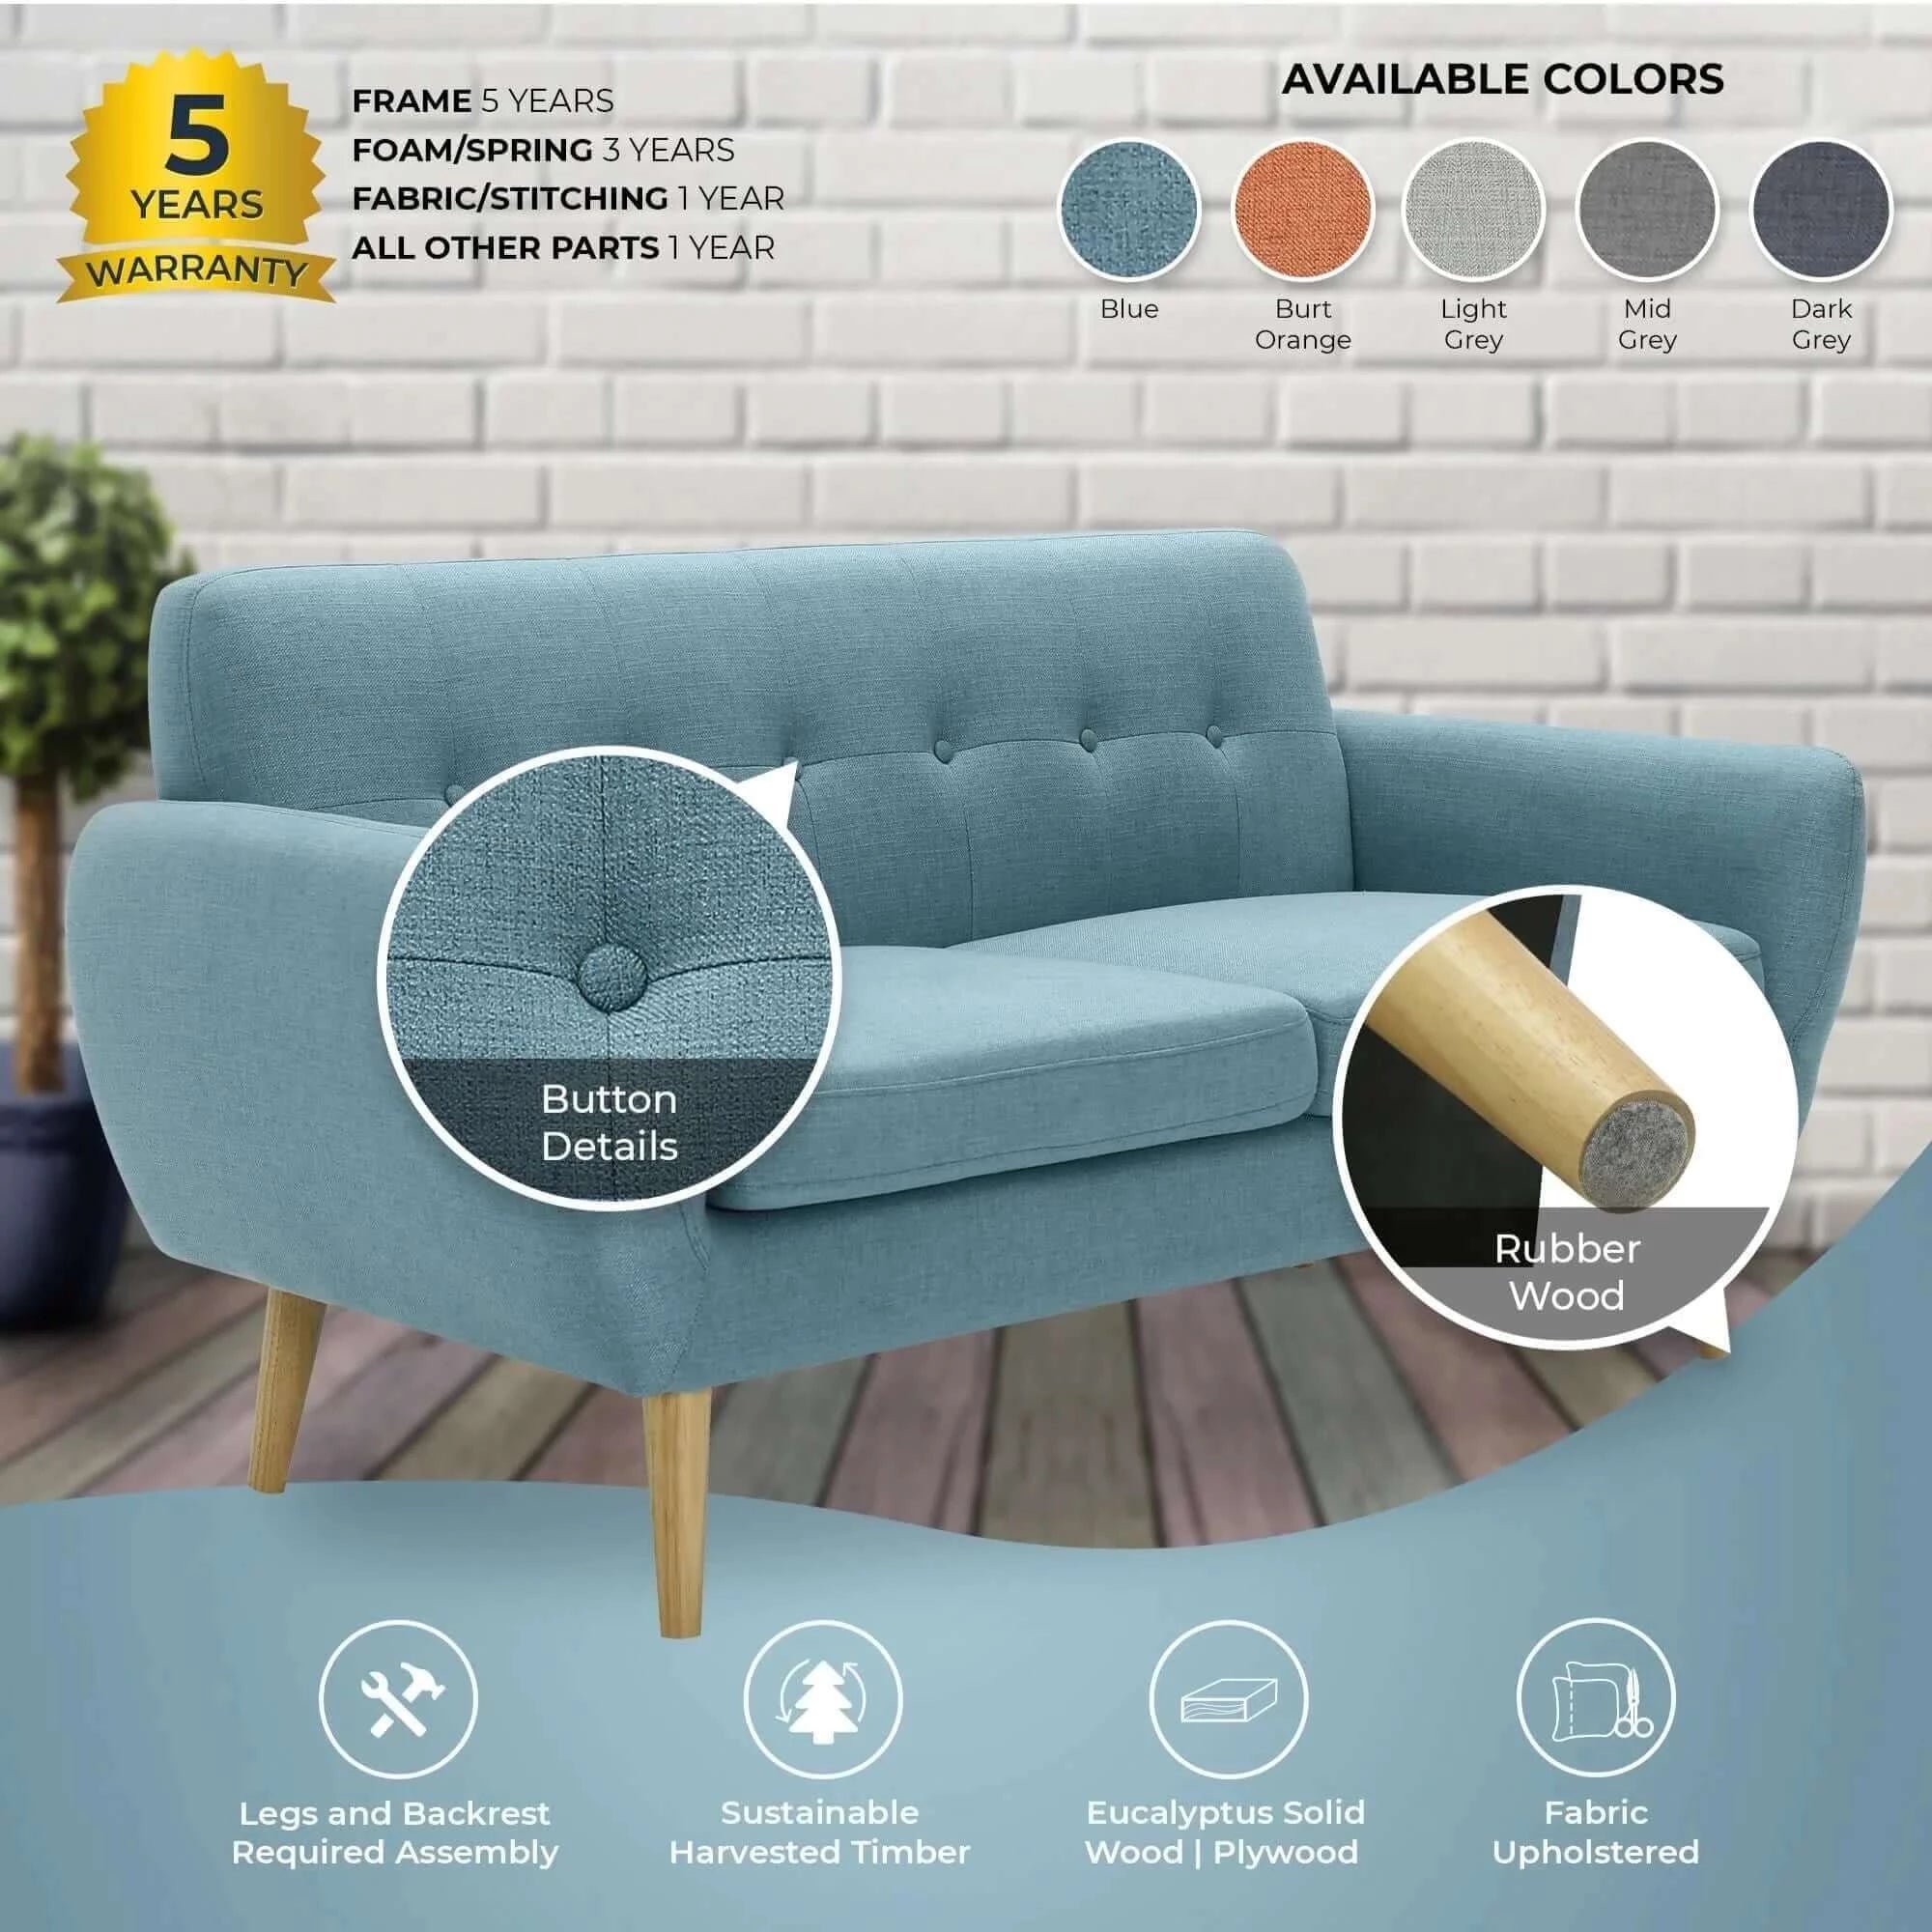 Buy dane 3 + 1 seater fabric upholstered sofa armchair lounge couch - blue - upinteriors-Upinteriors